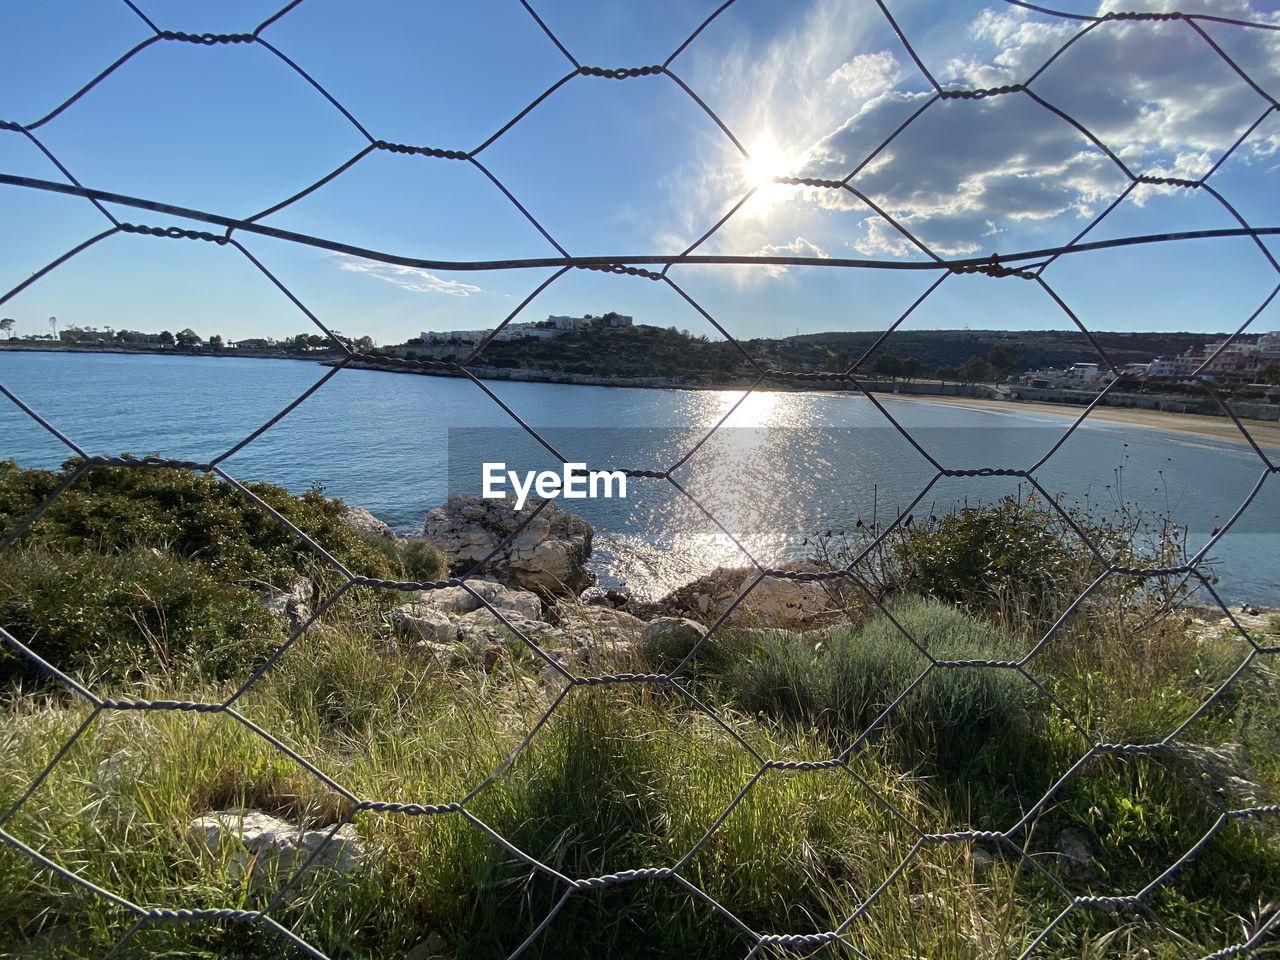 sky, water, nature, fence, sea, no people, beauty in nature, chainlink fence, wire, security, plant, tranquility, cloud, protection, land, scenics - nature, reflection, outdoors, beach, day, grass, tranquil scene, environment, wire fencing, sunlight, wire mesh, architecture, blue